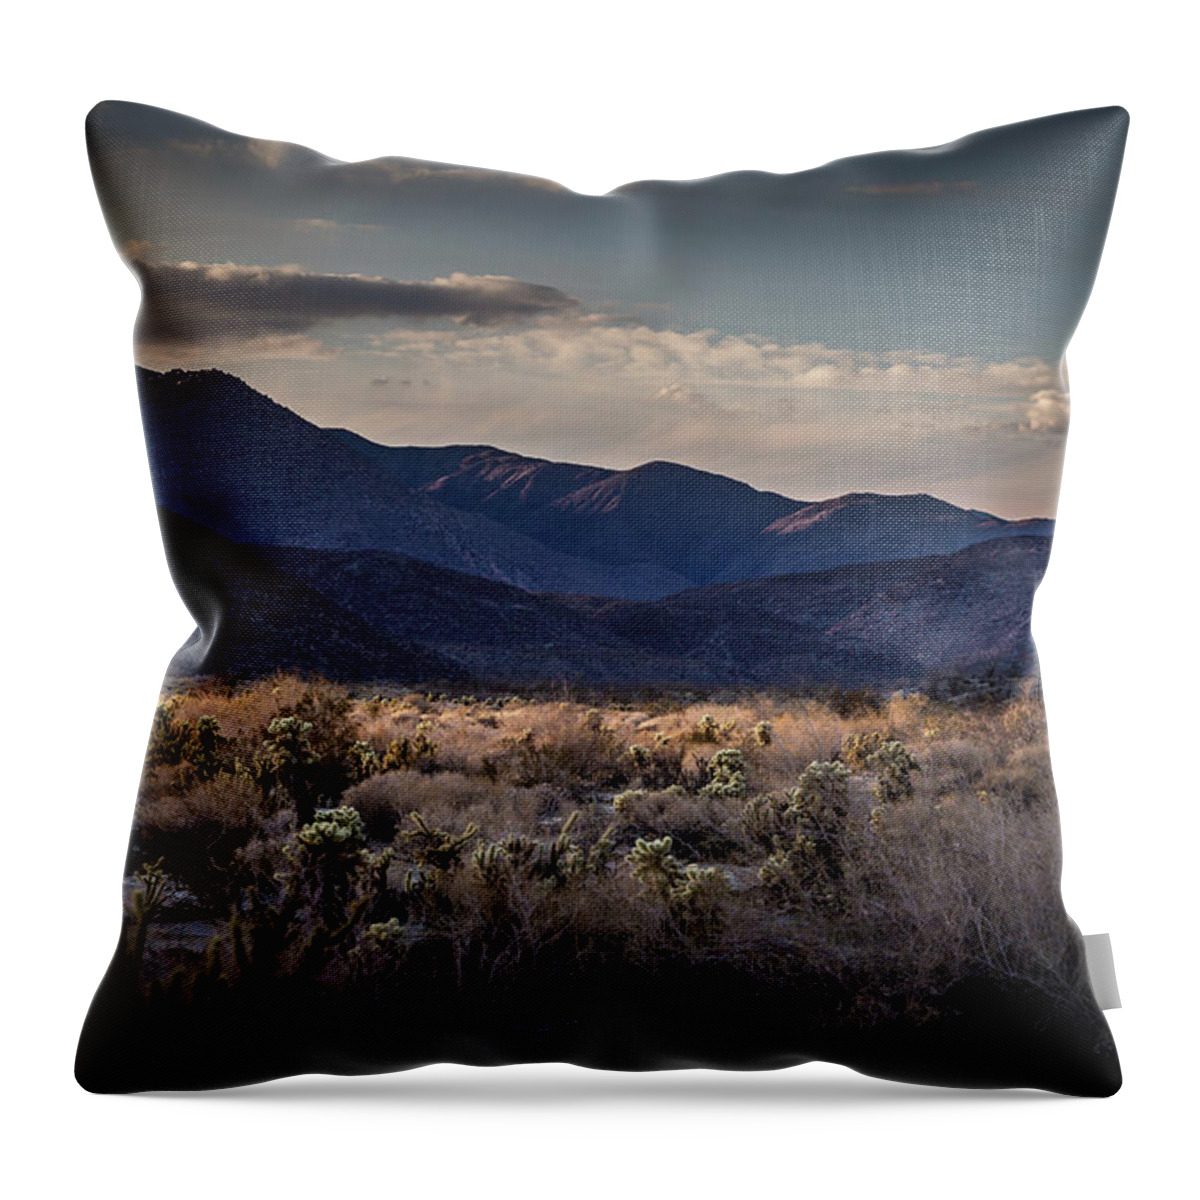 Anza-borrego Desert Throw Pillow featuring the photograph The American West by Peter Tellone